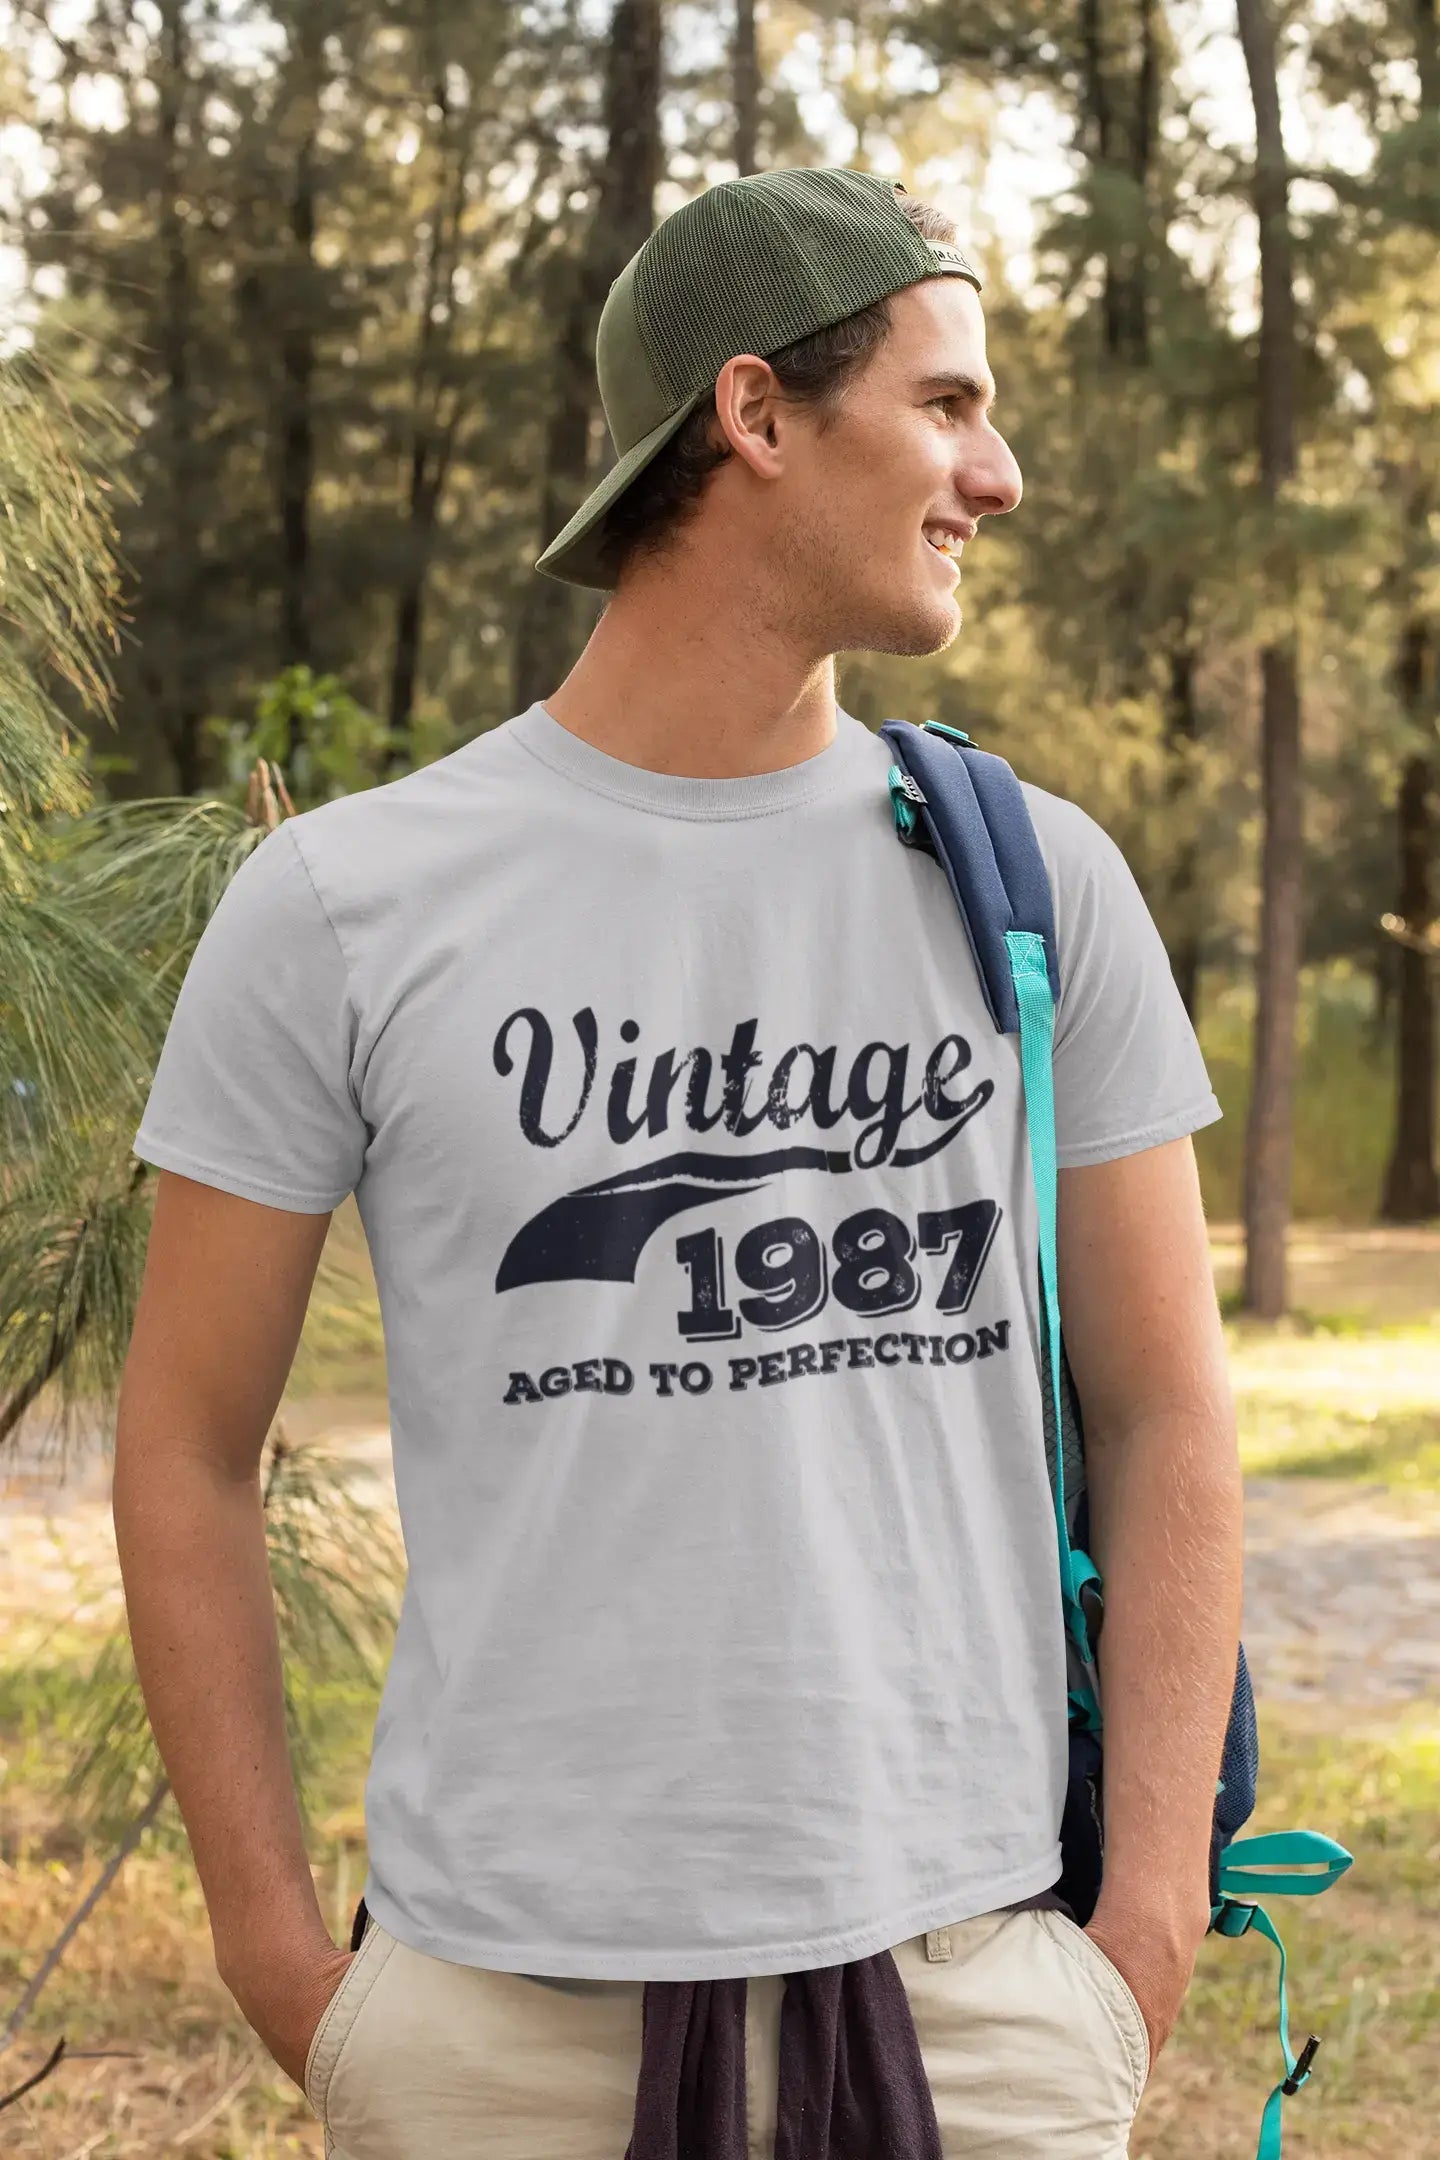 Vintage Aged to Perfection 1987, Grey, Men's Short Sleeve Round Neck T-shirt, gift t-shirt 00346